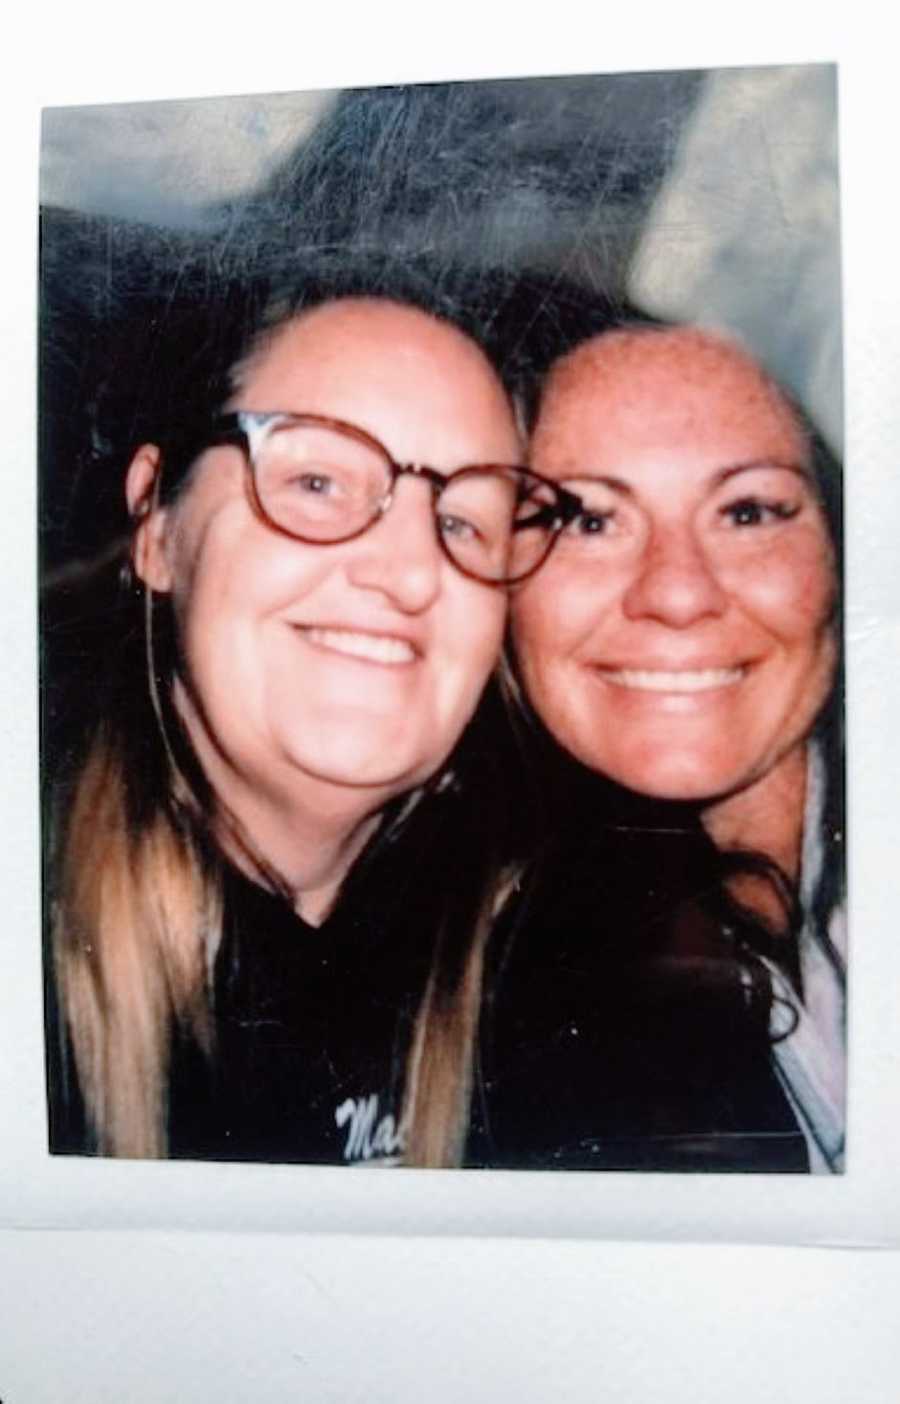 Lesbian couple take a polaroid photo together while on a date